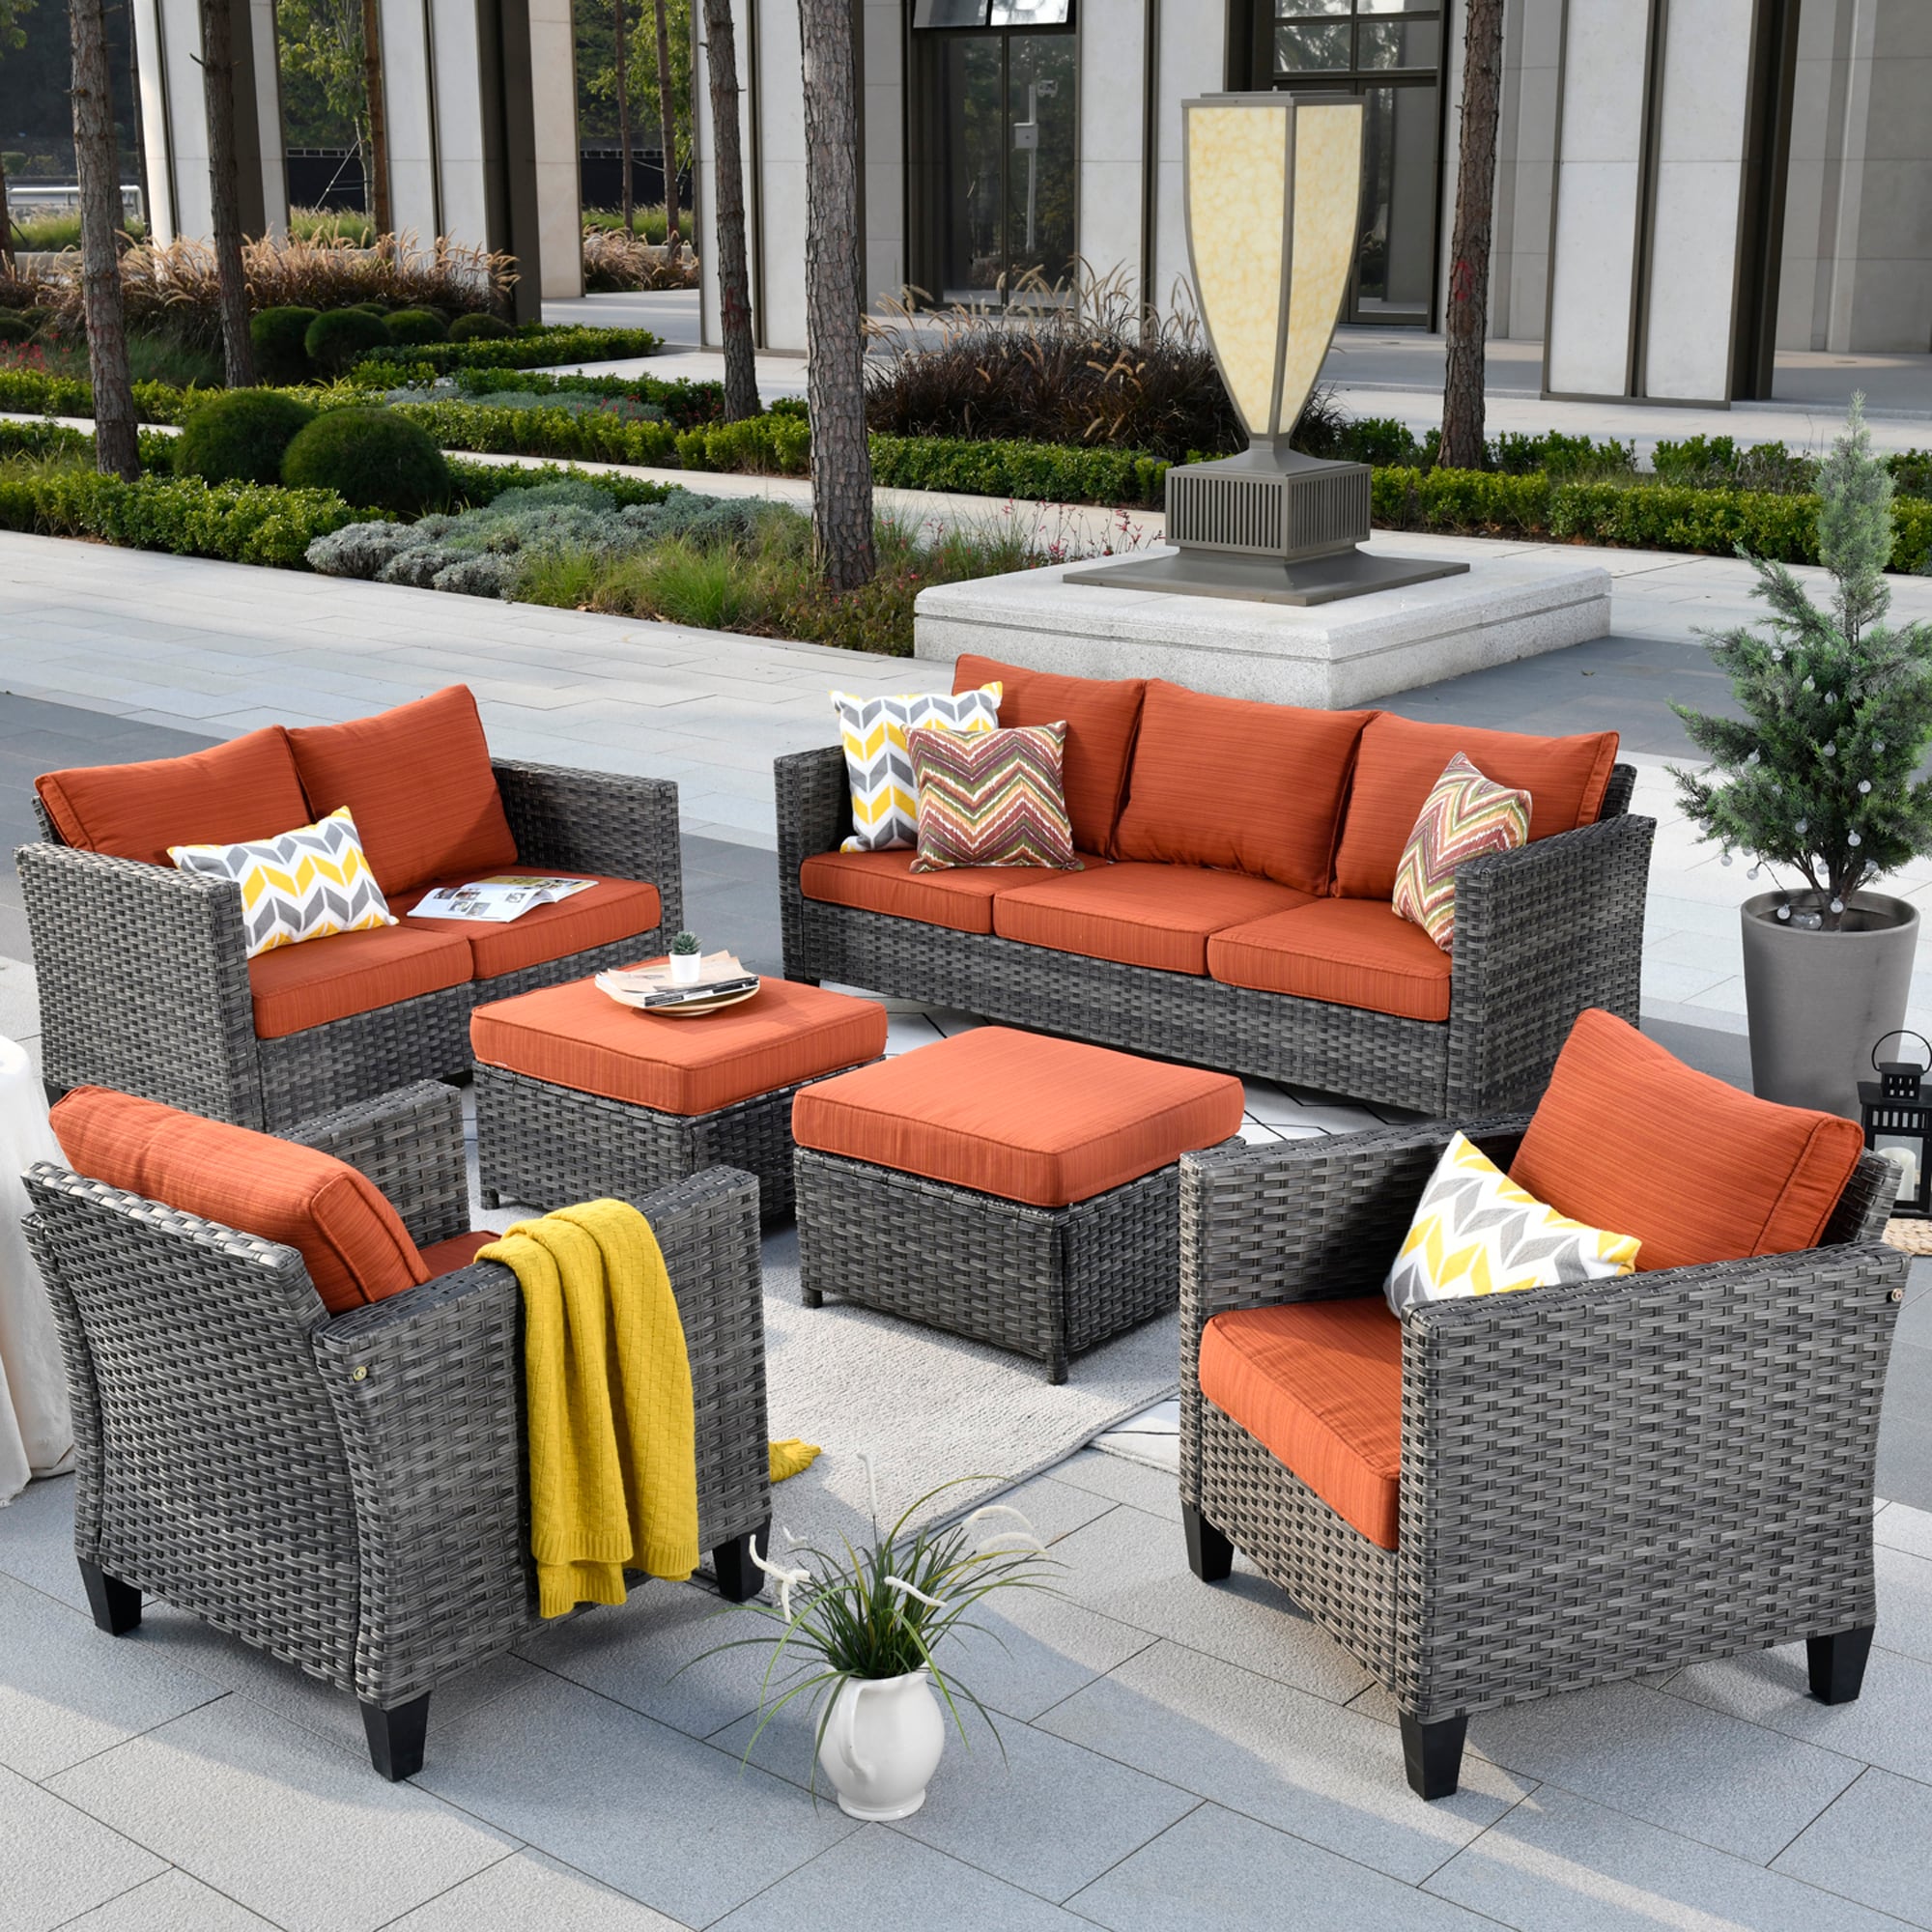 Pouuin 6-Piece Wicker Patio Conversation Set with Red Olefin Cushions ...